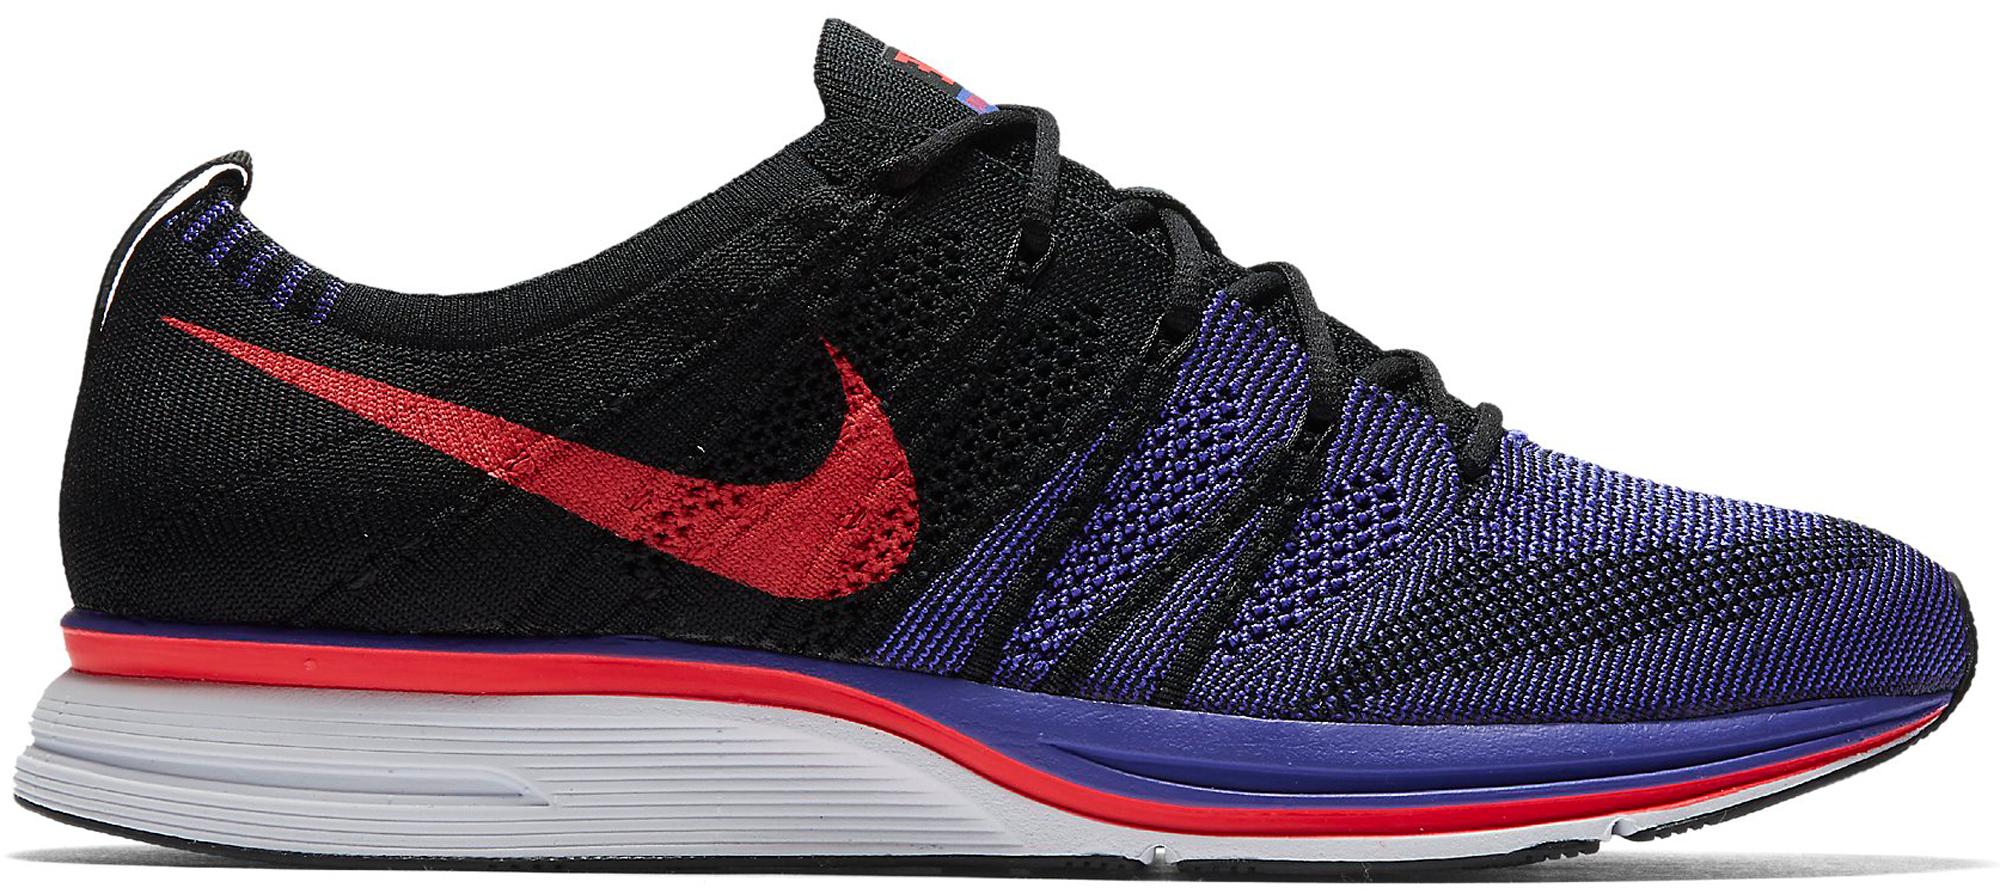 Nike Flyknit Trainer Siren Red Persian Violet